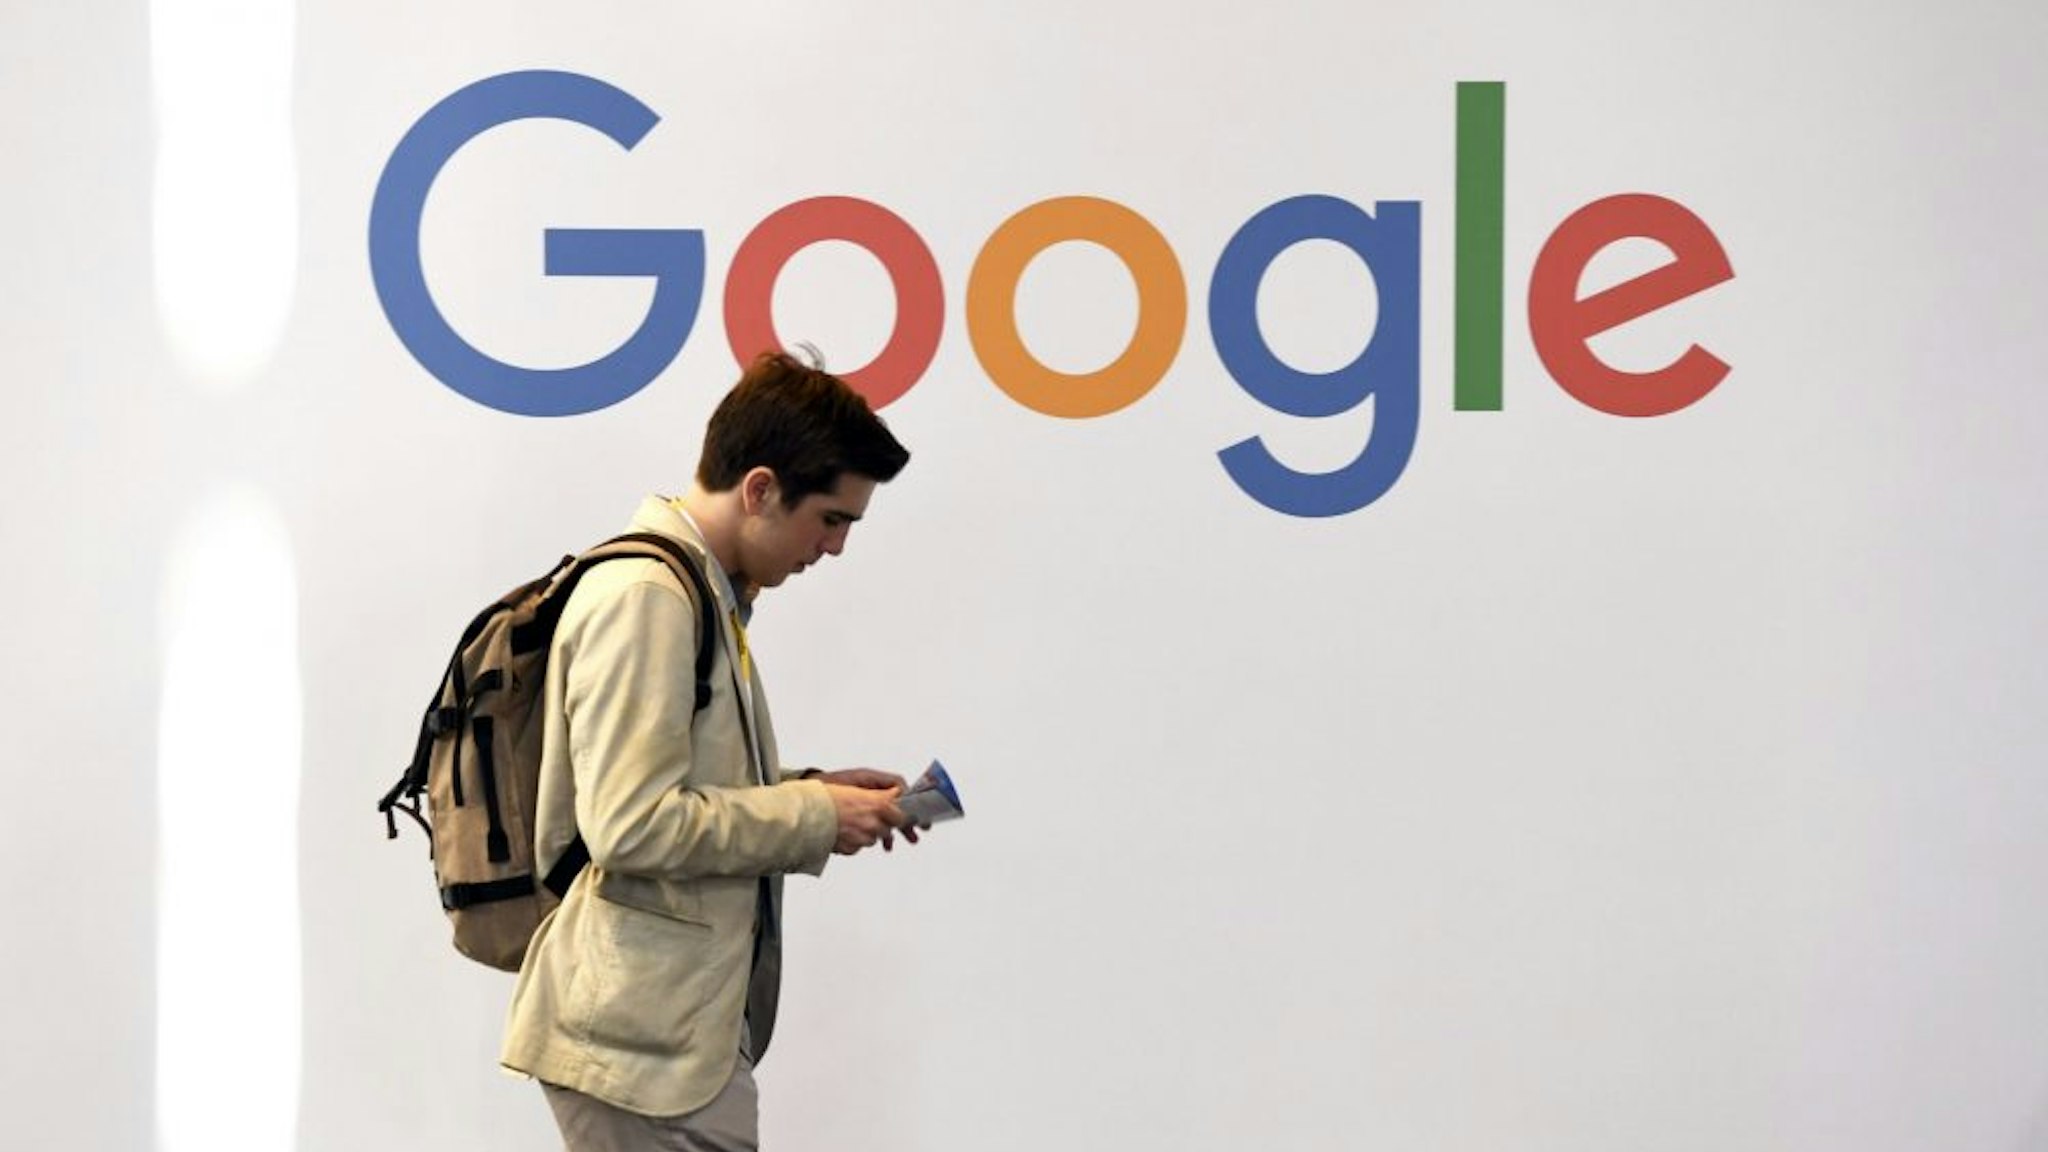 A man walks past the logo of the US multinational technology company Google during the VivaTech trade fair ( Viva Technology), on May 24, 2018 in Paris.